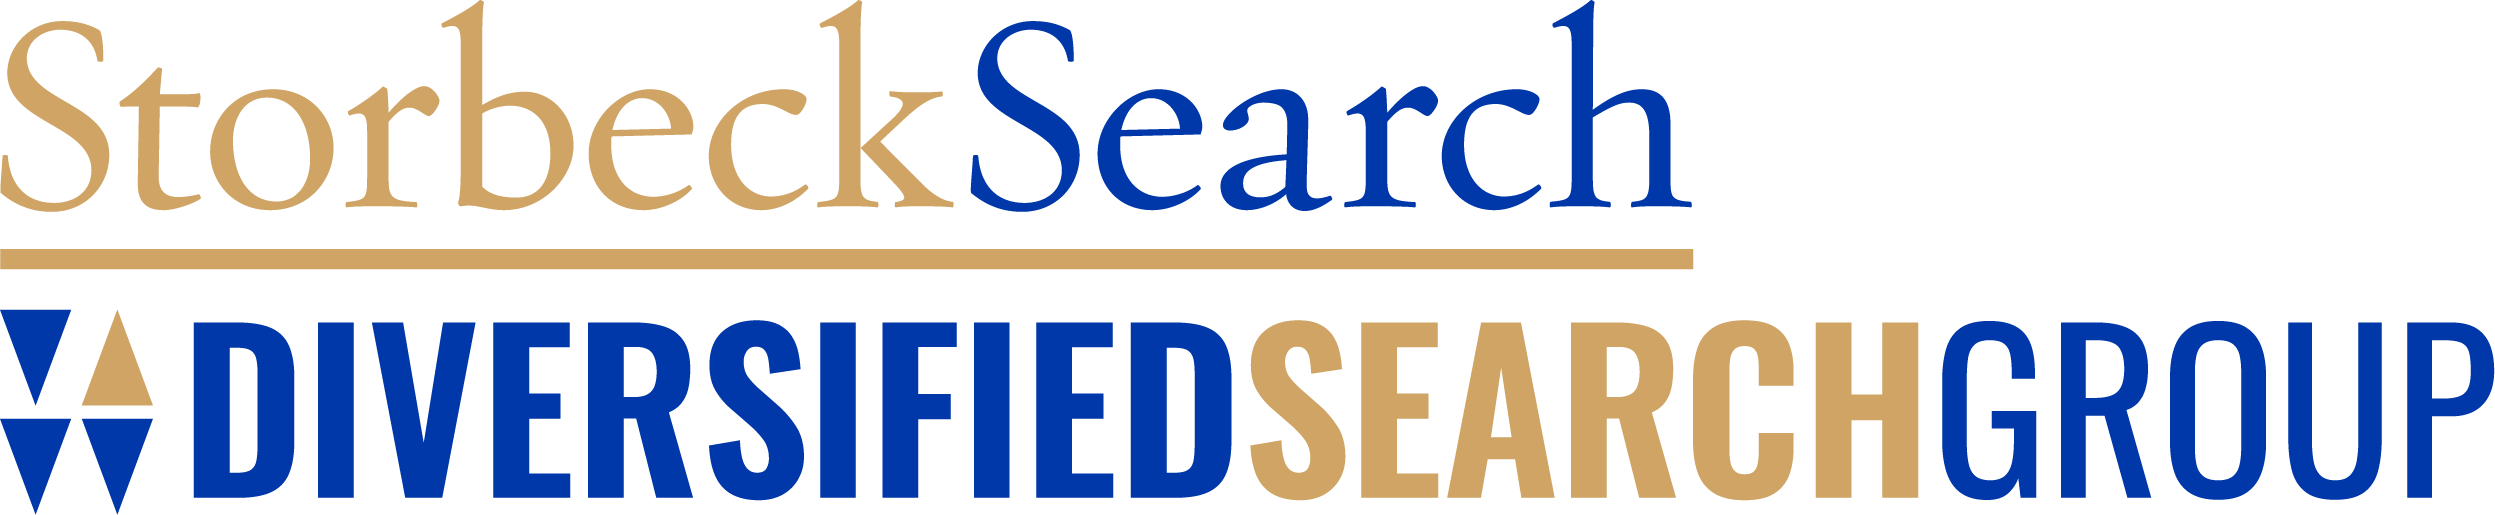 Storbeck Search logo